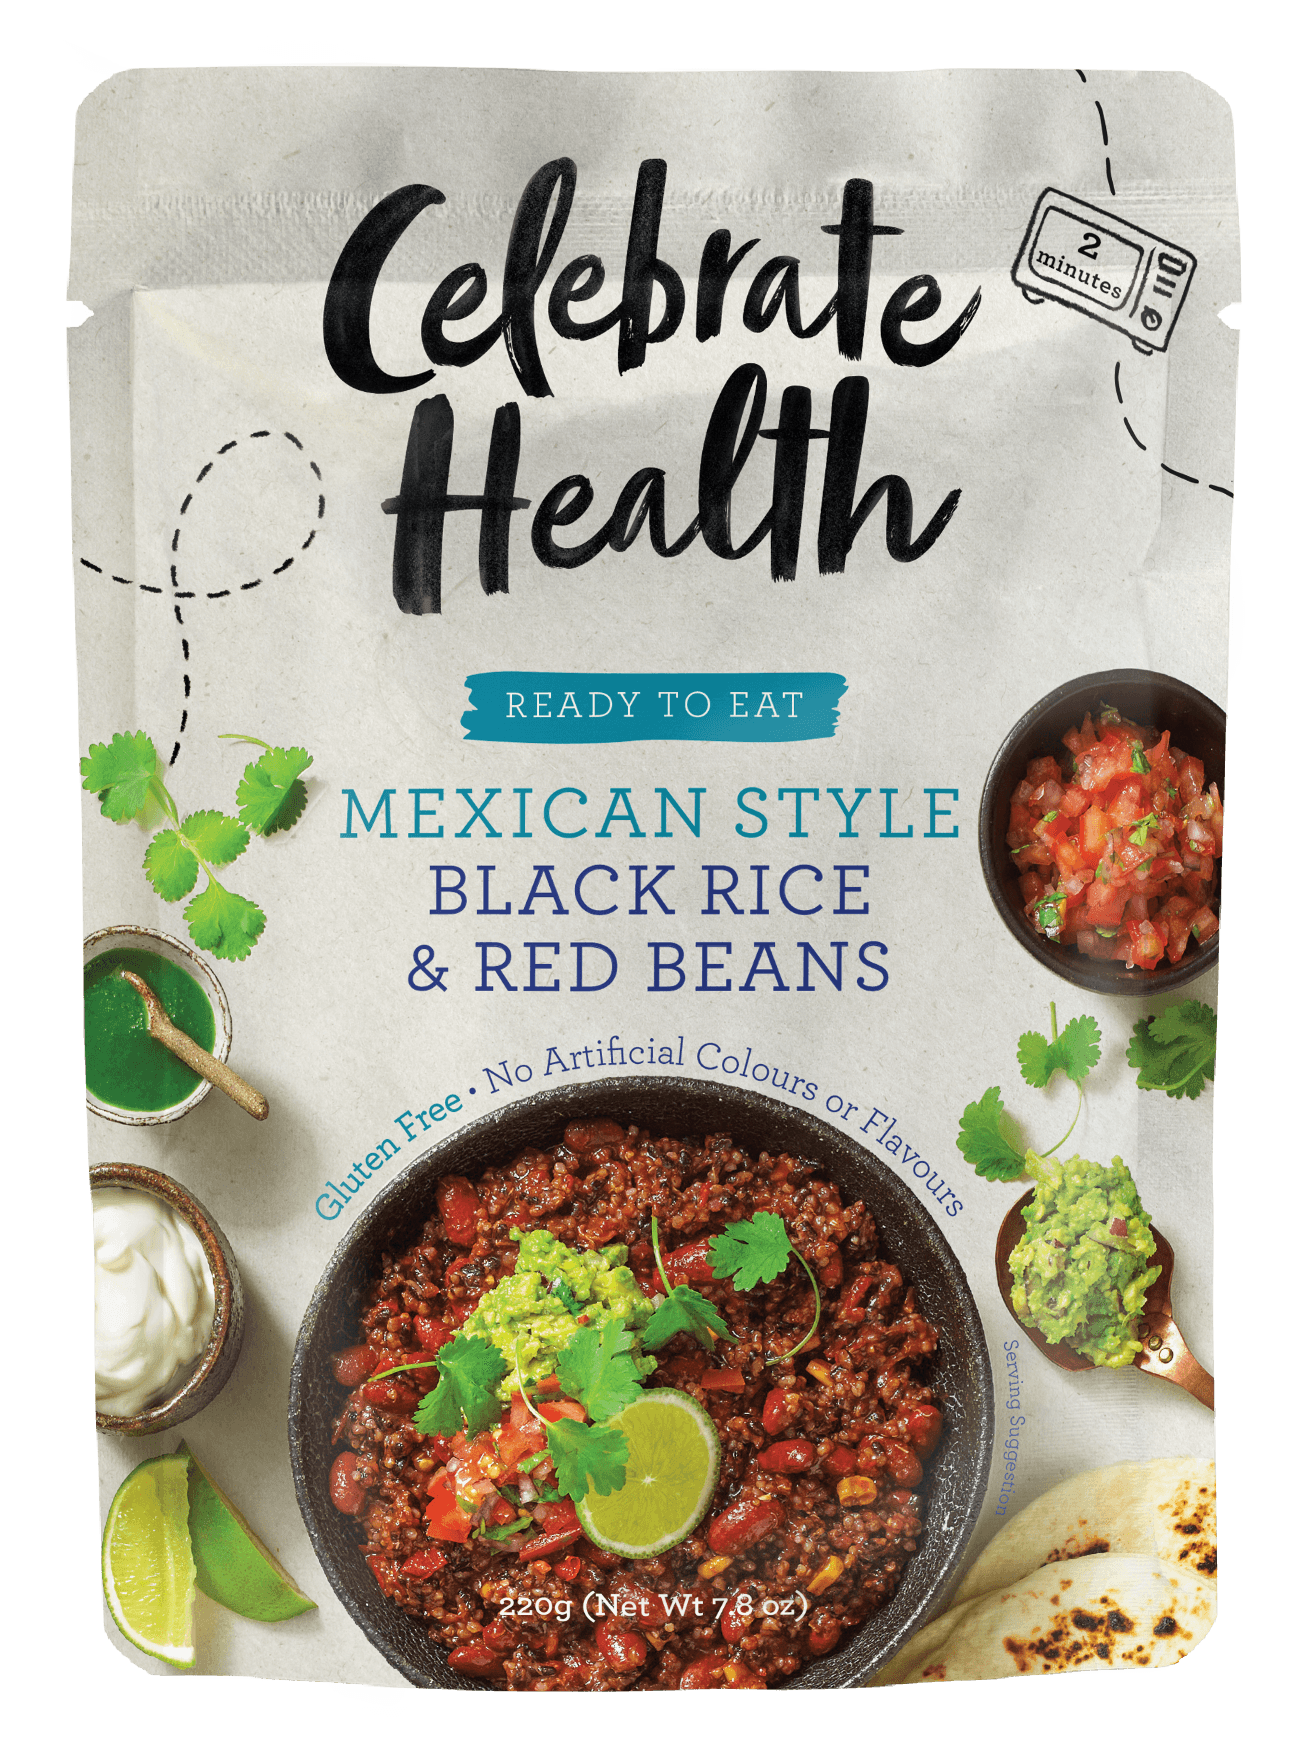 Celebrate Health Ready To Eat Mexican Style Black Rice & Red Beans Image